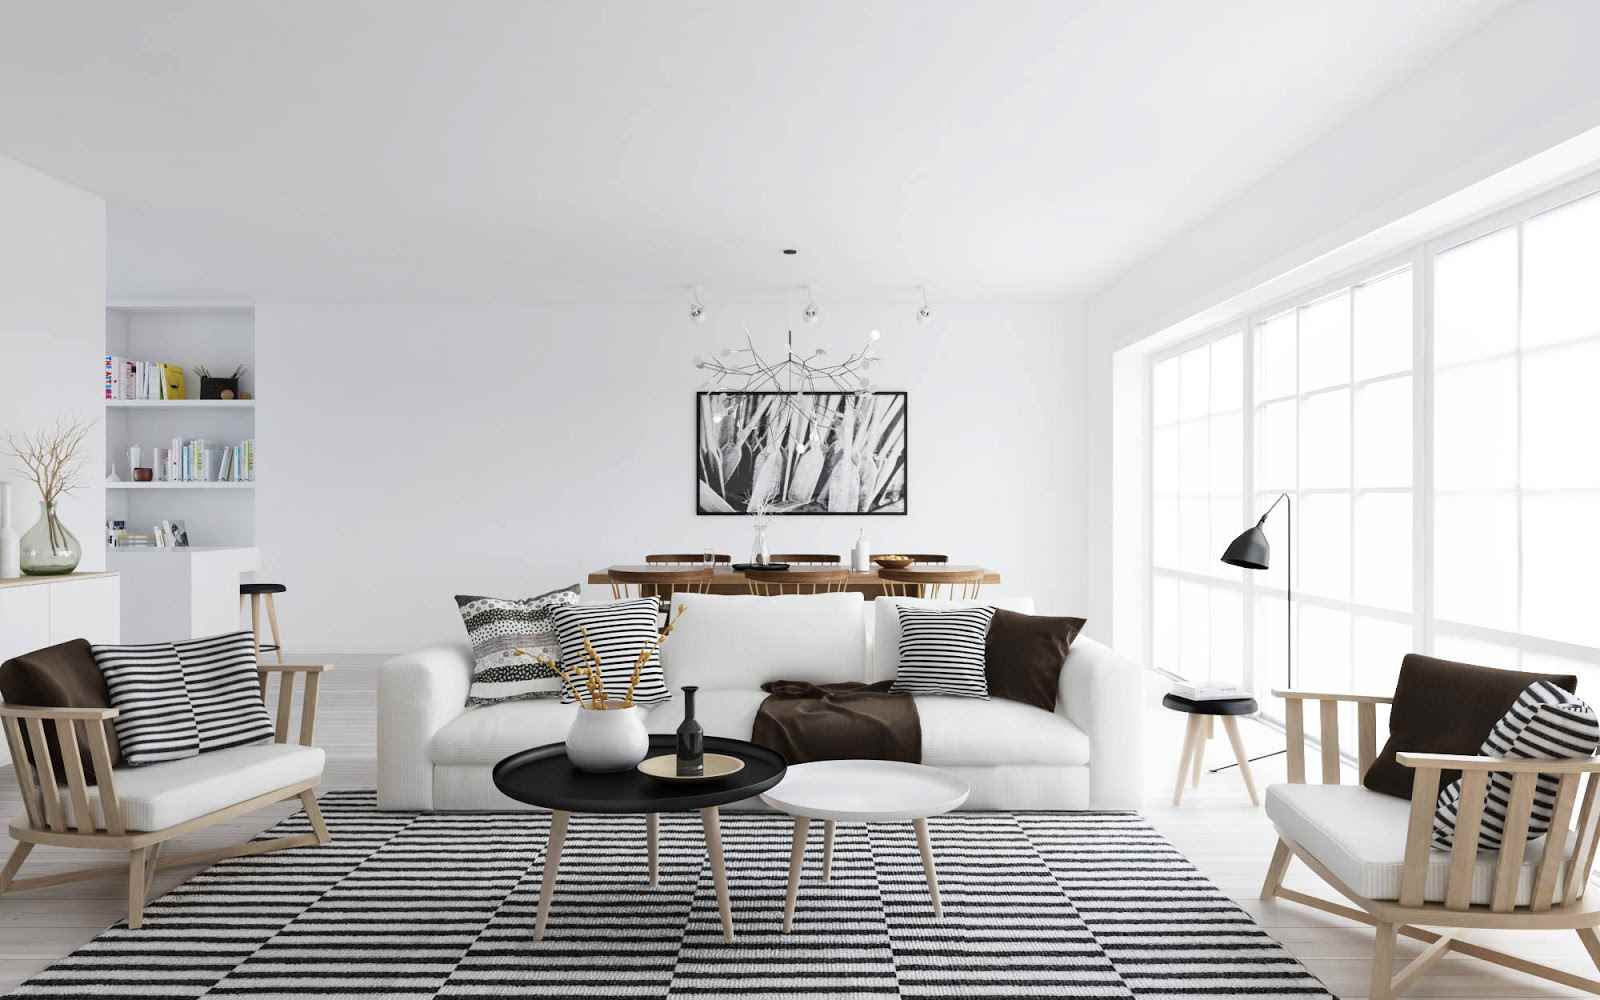 An example of using a bright Scandinavian style in the interior